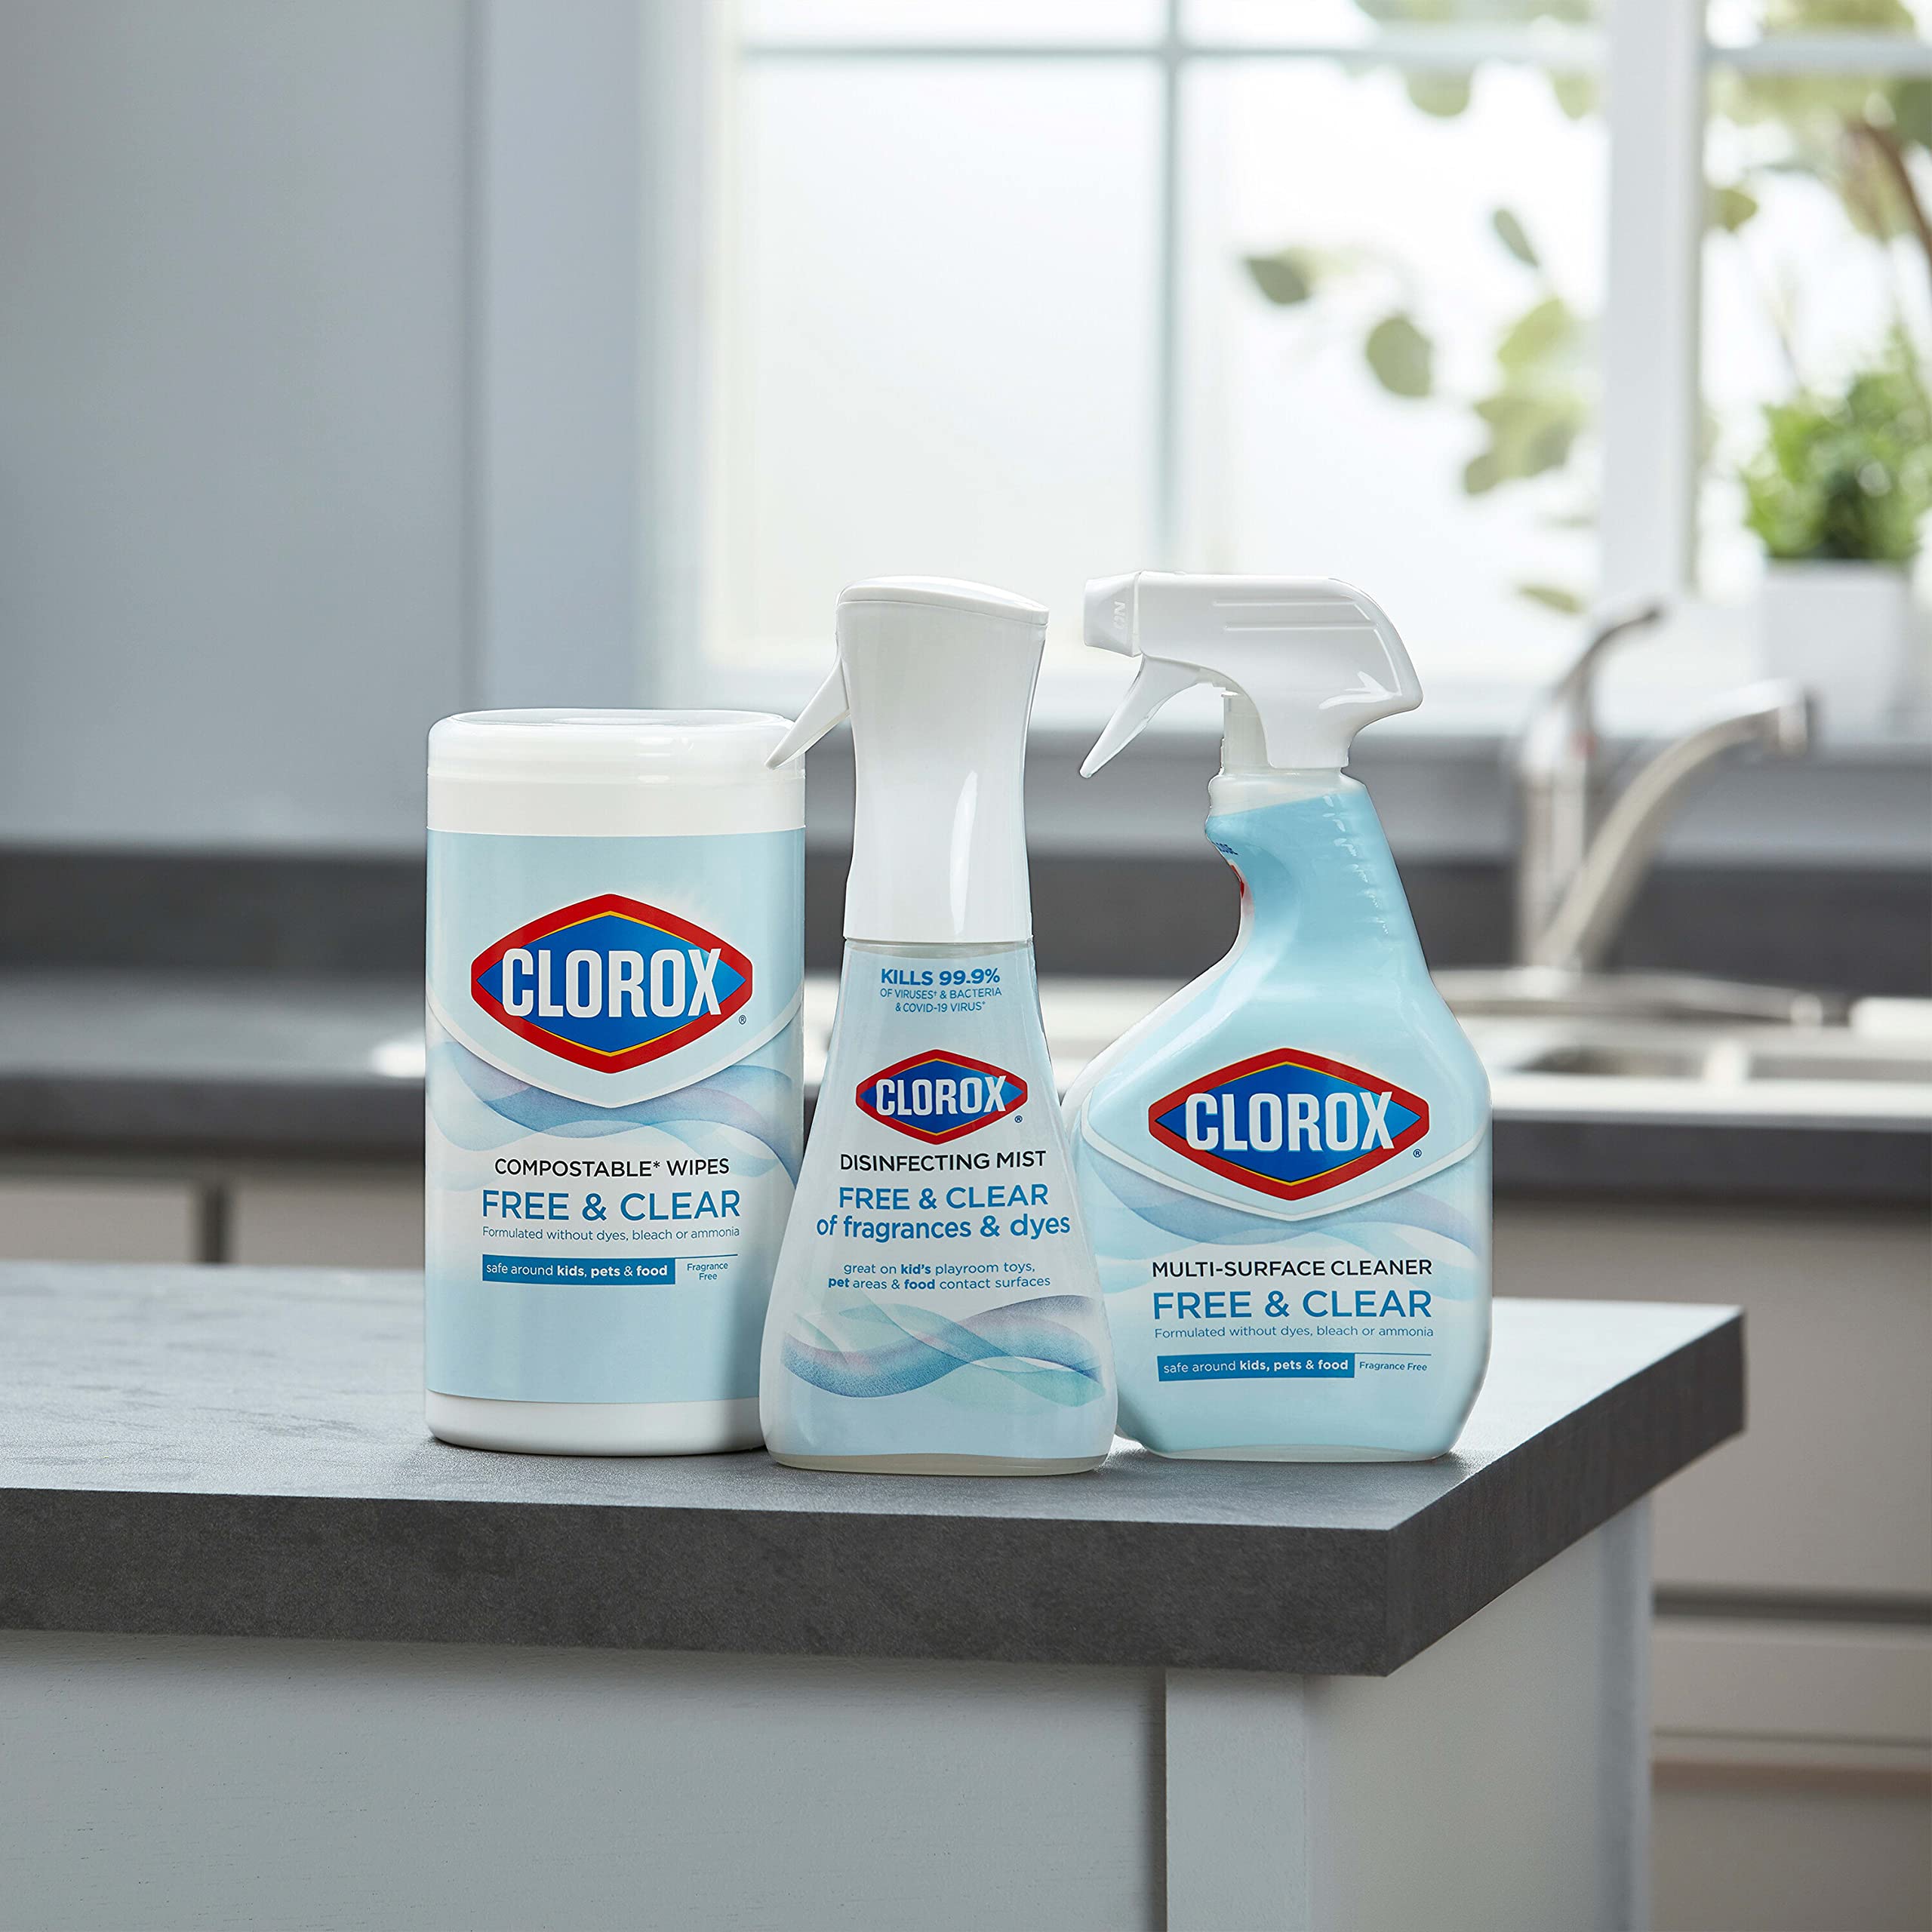 Clorox Free & Clear Disinfecting Mist, 1 Spray Bottle and 1 Refill, 14 Fl Oz Each